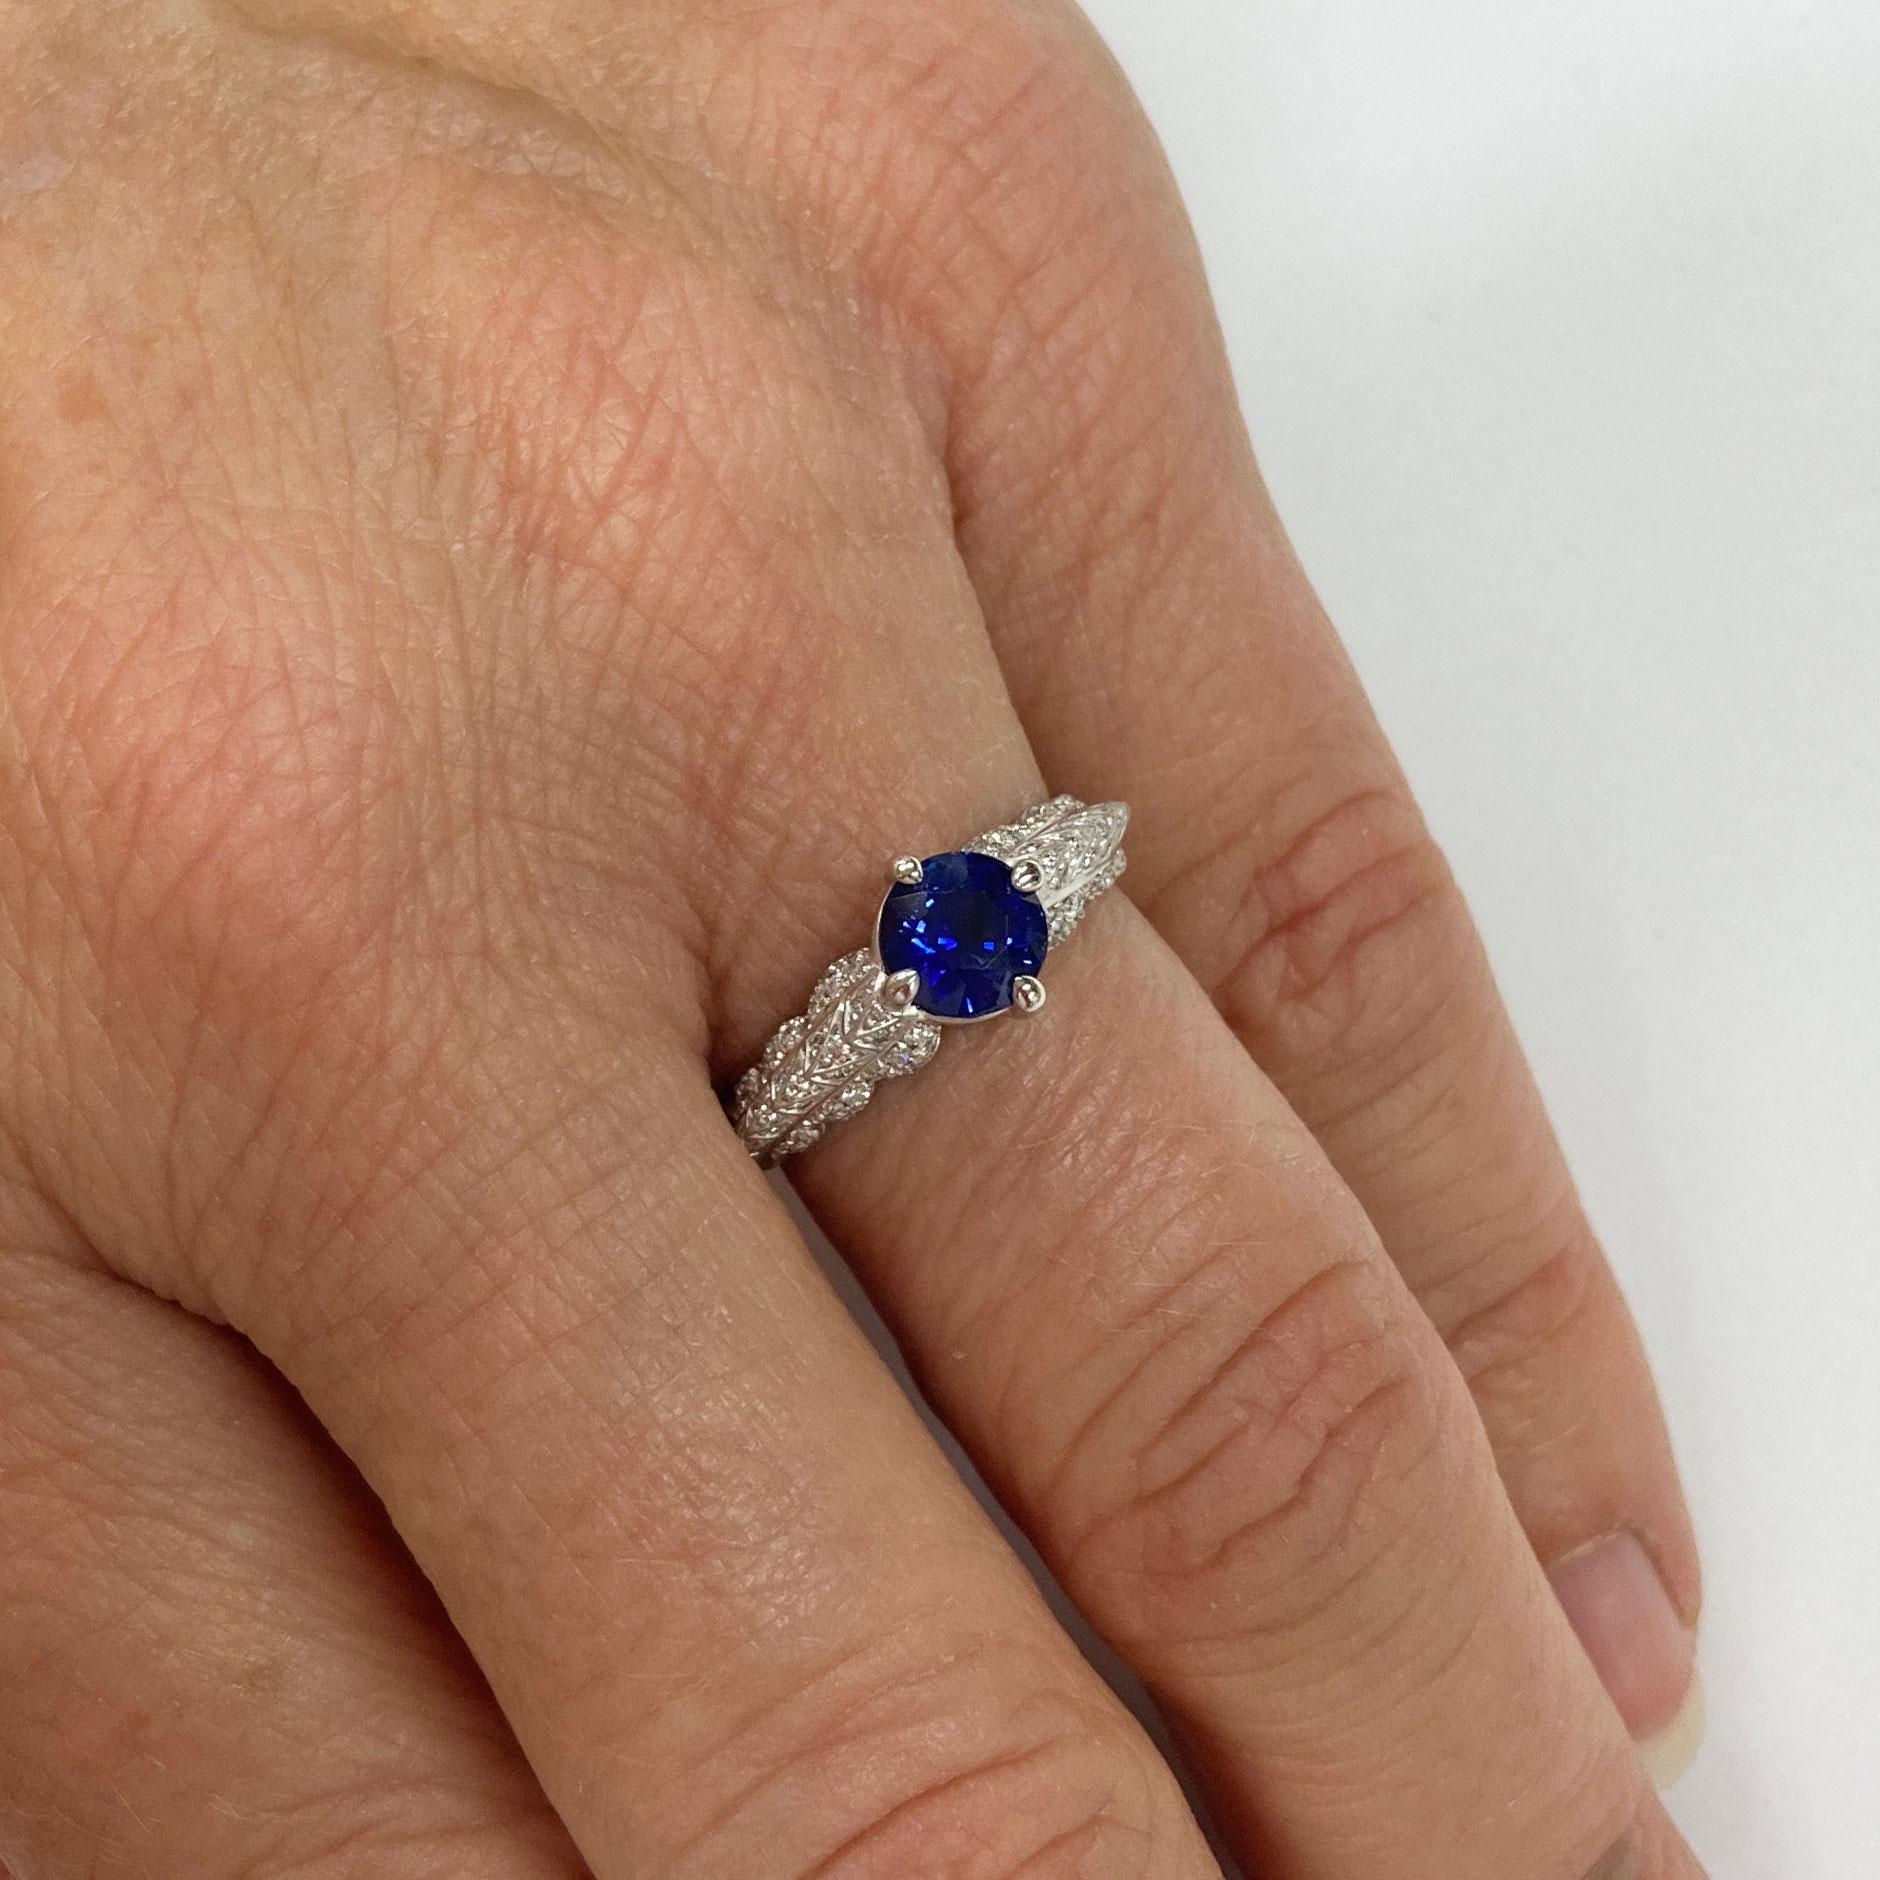 This extraordinary Ring in 18 Kt White Gold showcases a blue Sapphire of 1.23 ct in a 4 prong setting . The shoulders have an organic appearance and are pave set with 90 Diamonds with a total weight of 0.22 ct F/G if. 
This piece is the perfect